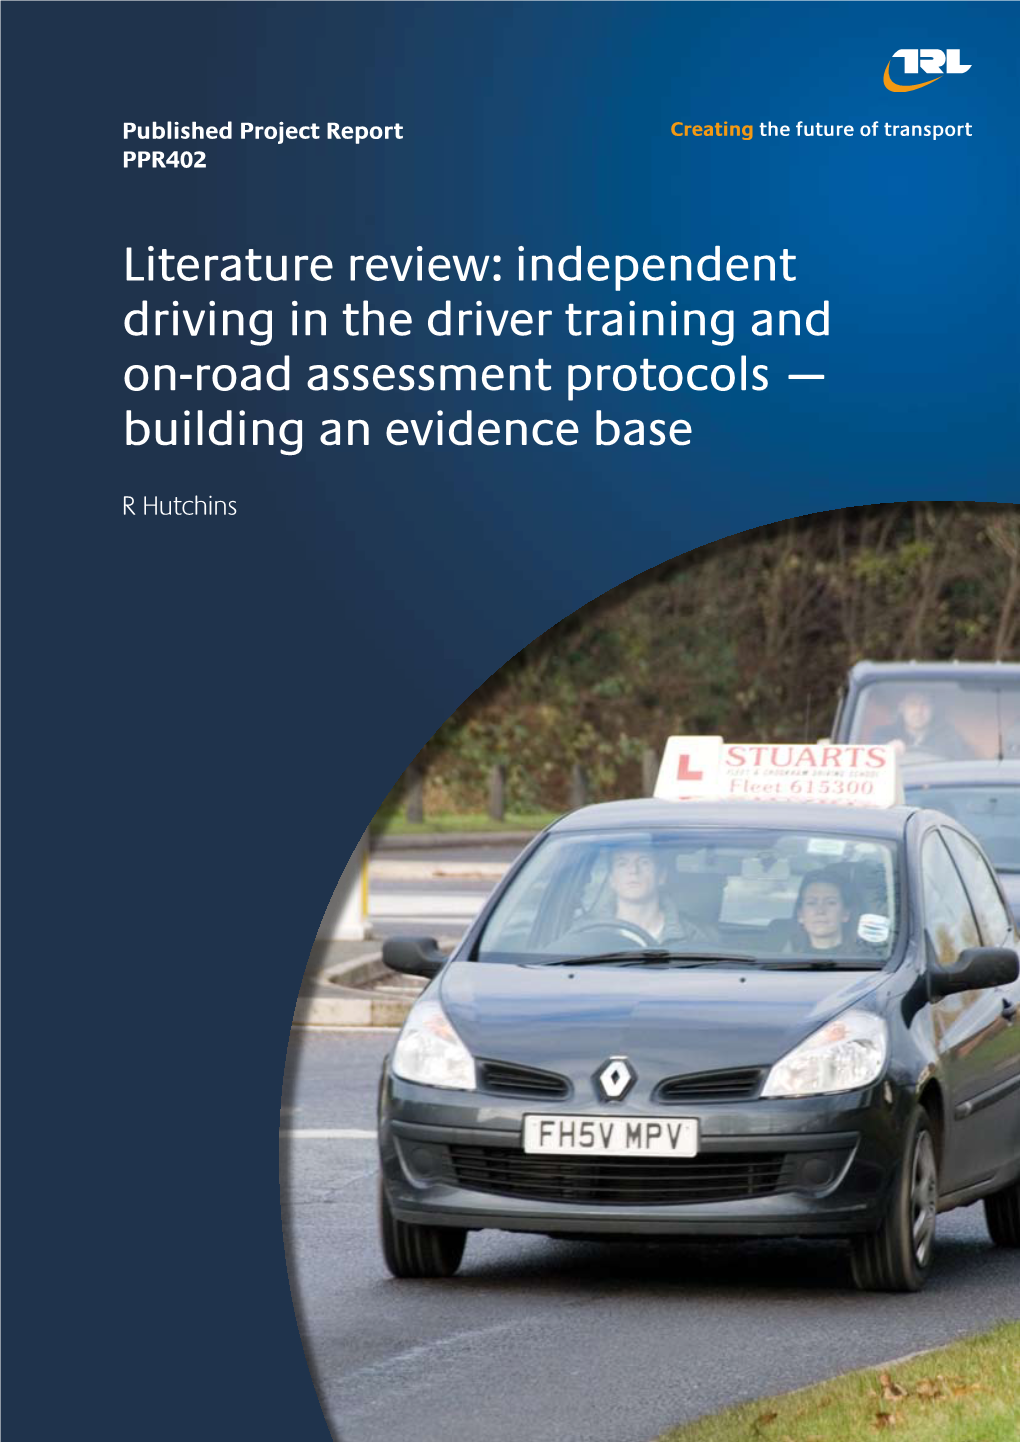 Literature Review: Independent Driving in the Driver Training and On-Road Assessment Protocols — Building an Evidence Base